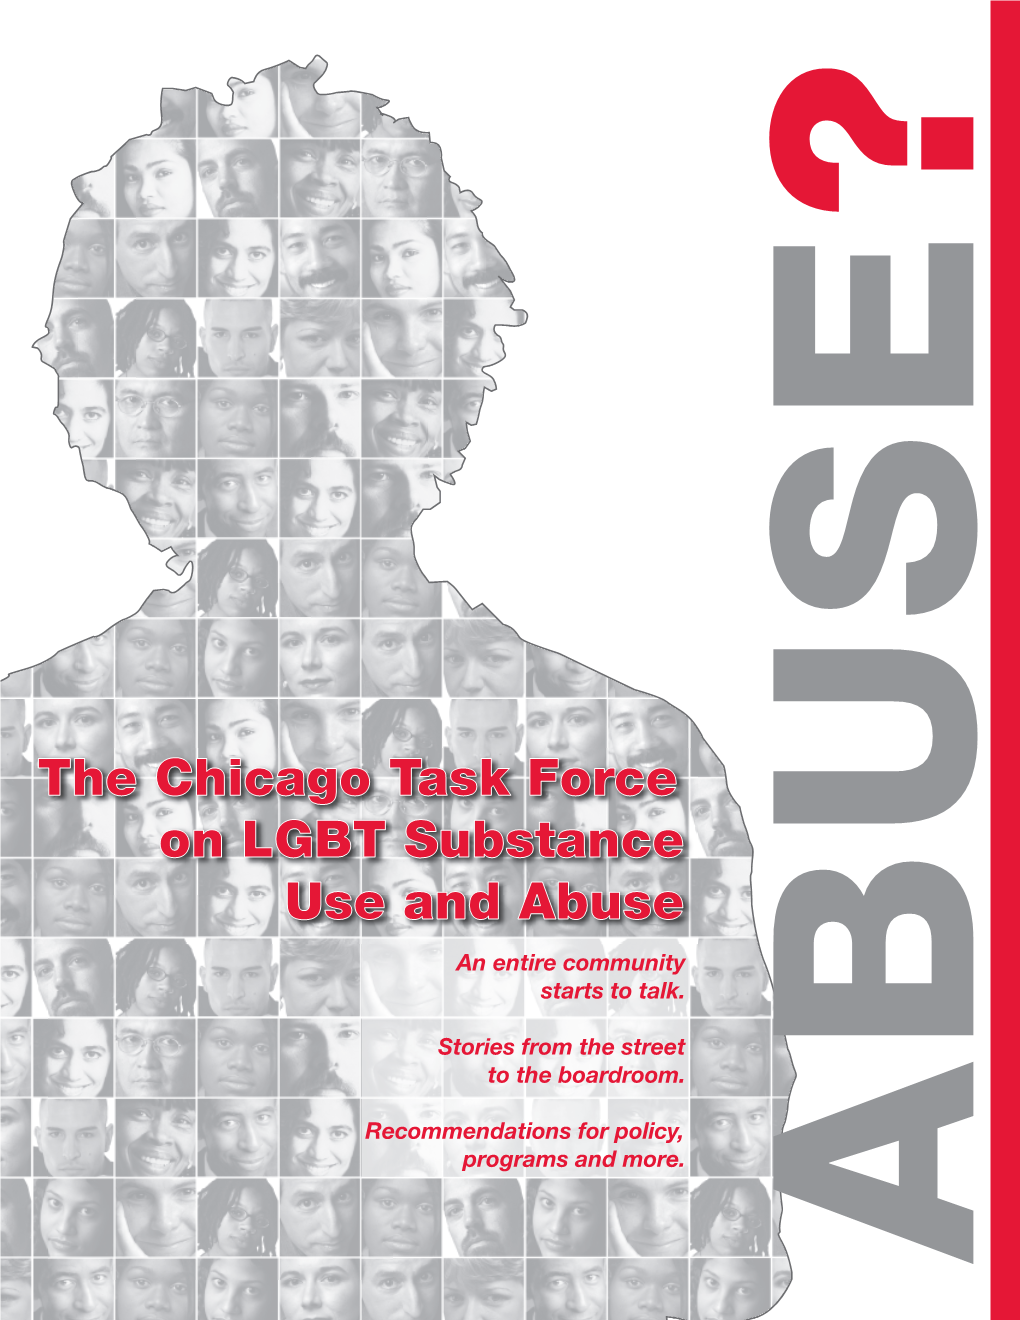 The Chicago Task Force on LGBT Substance Use and Abuse